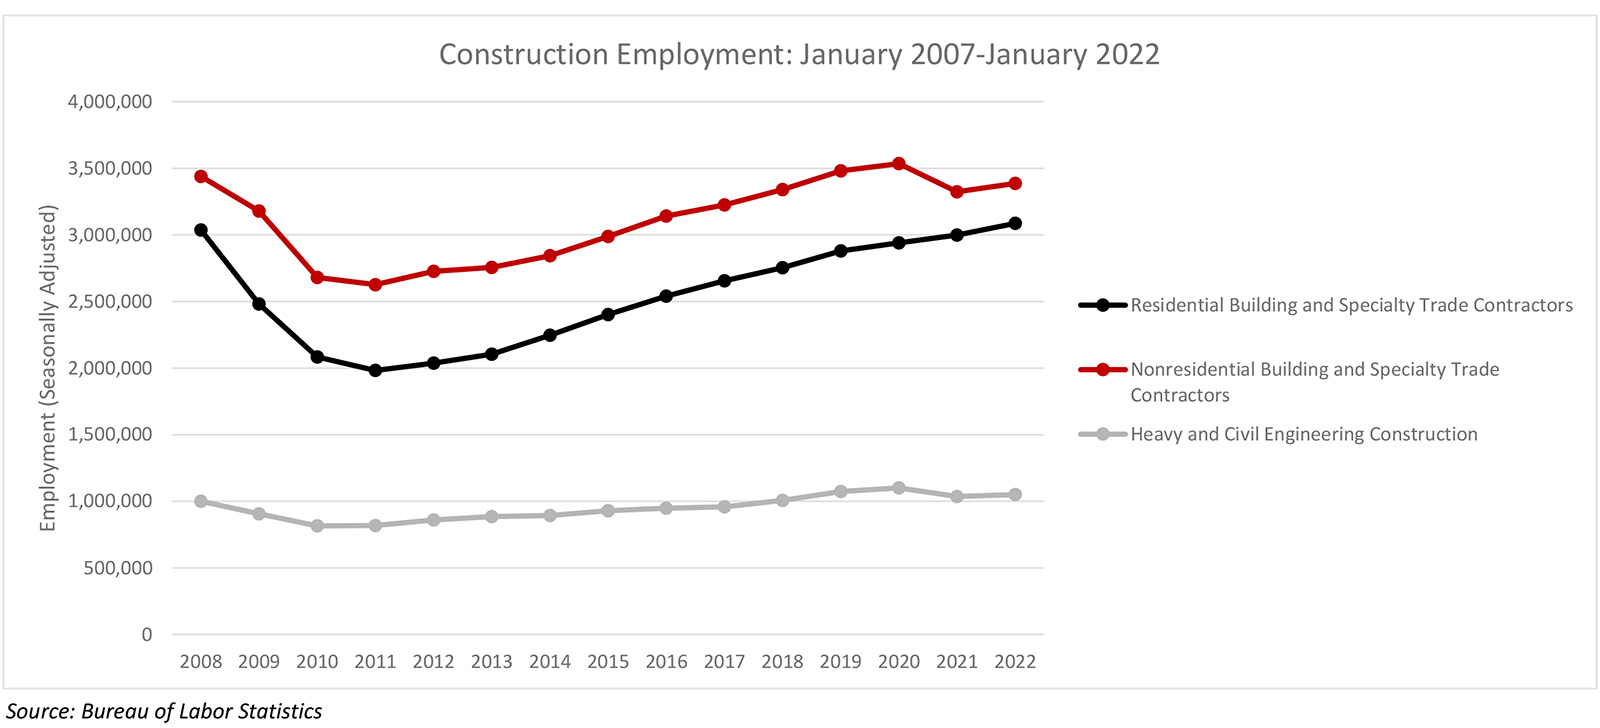 Nonresidential Construction Employment Declines by 9,000 in January